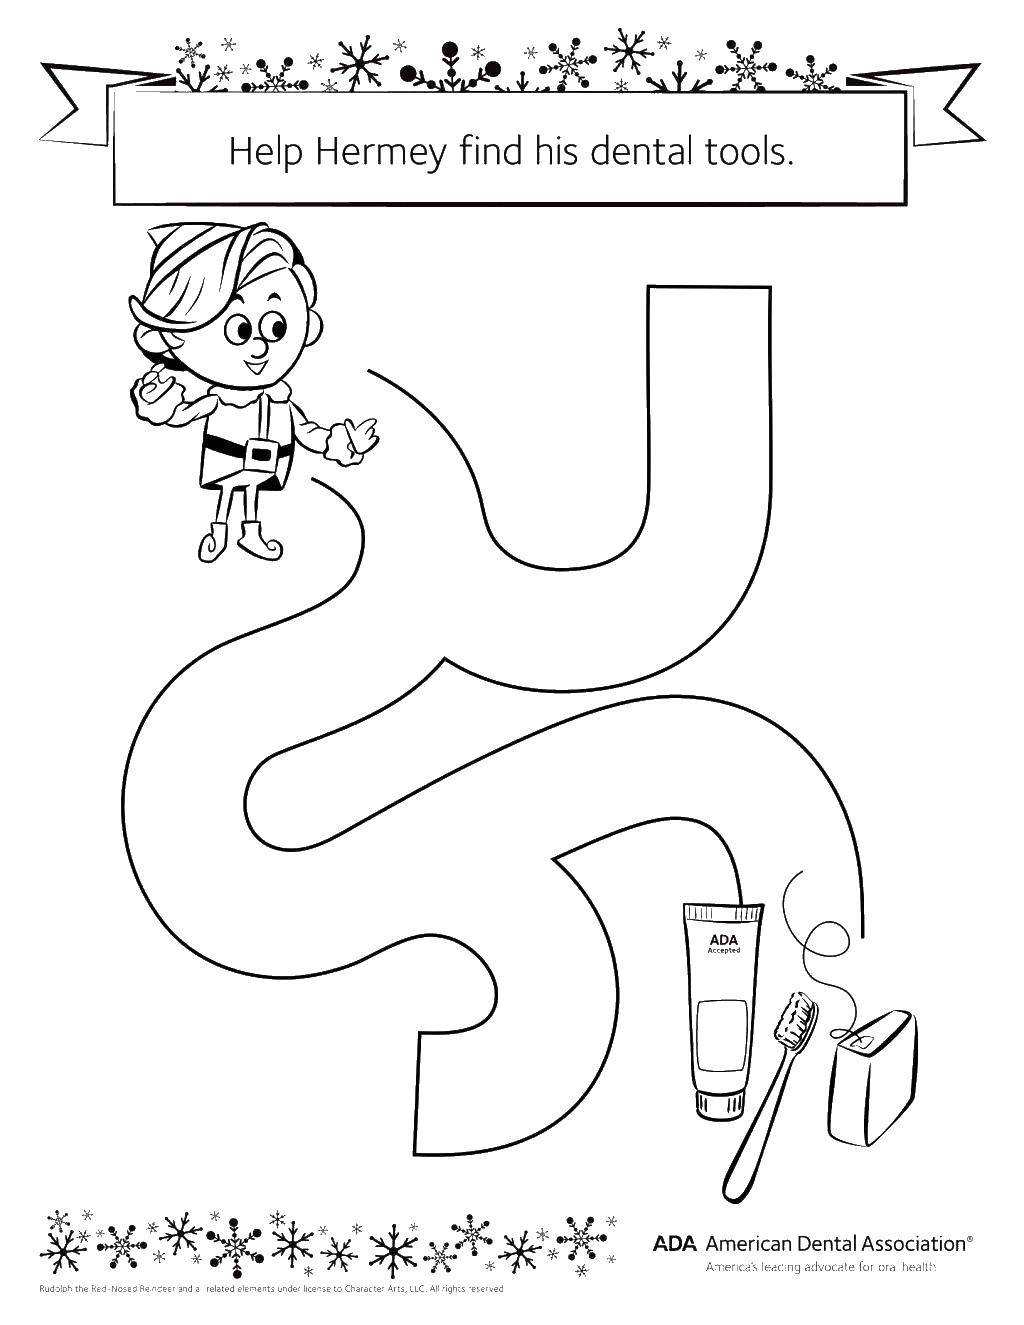 Coloring Help to find dental stuff. Category mazes. Tags:  Maze, logic.